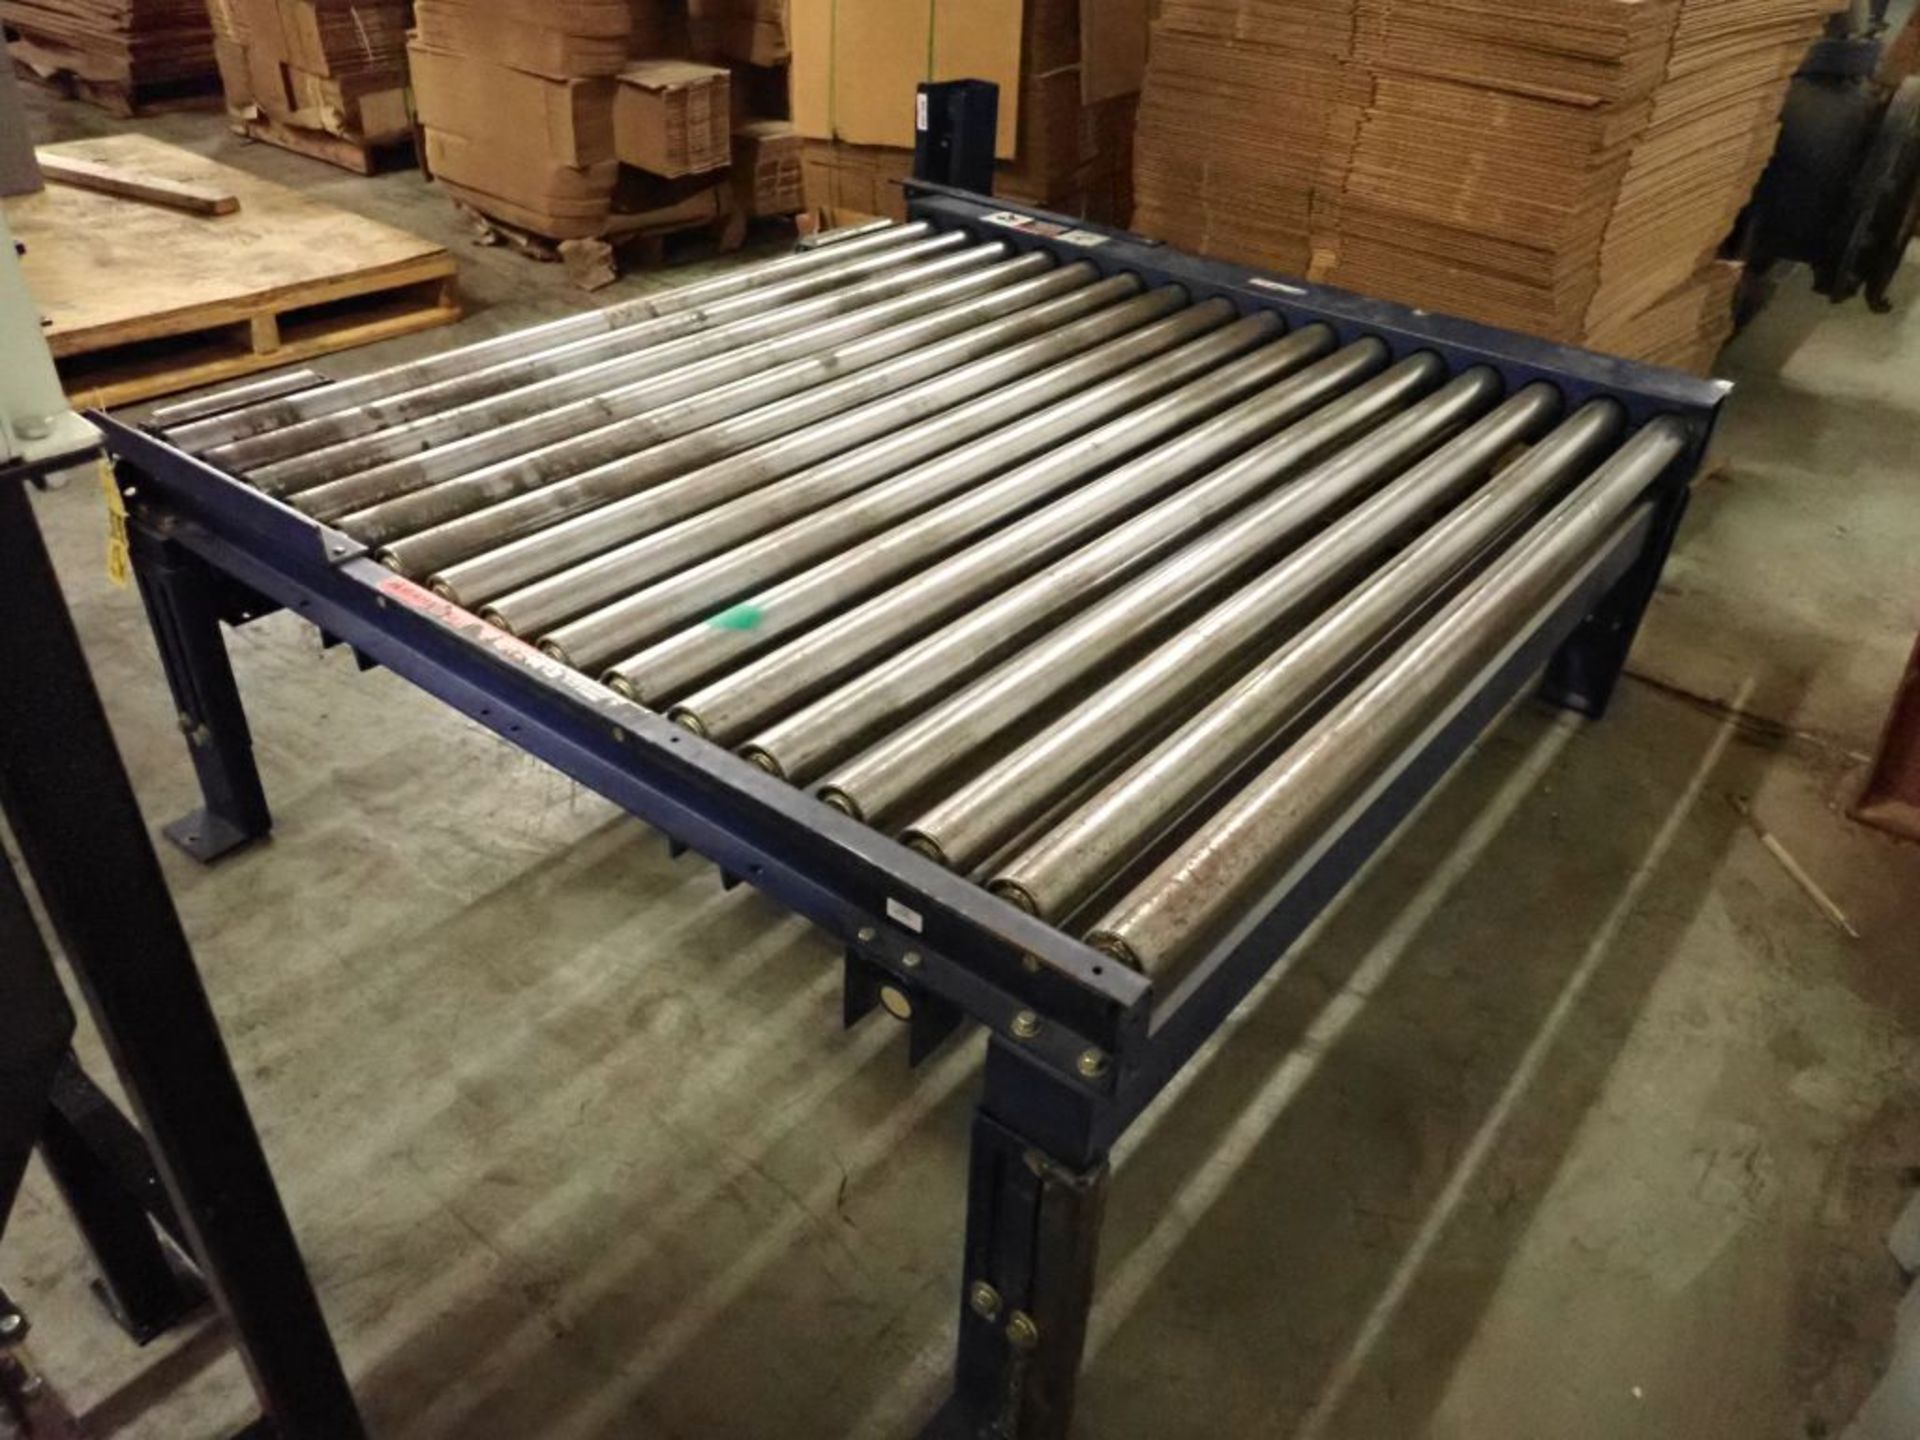 Lantech Pallet Wrapping System with Infeed and Outfeed Conveyor - Image 53 of 99